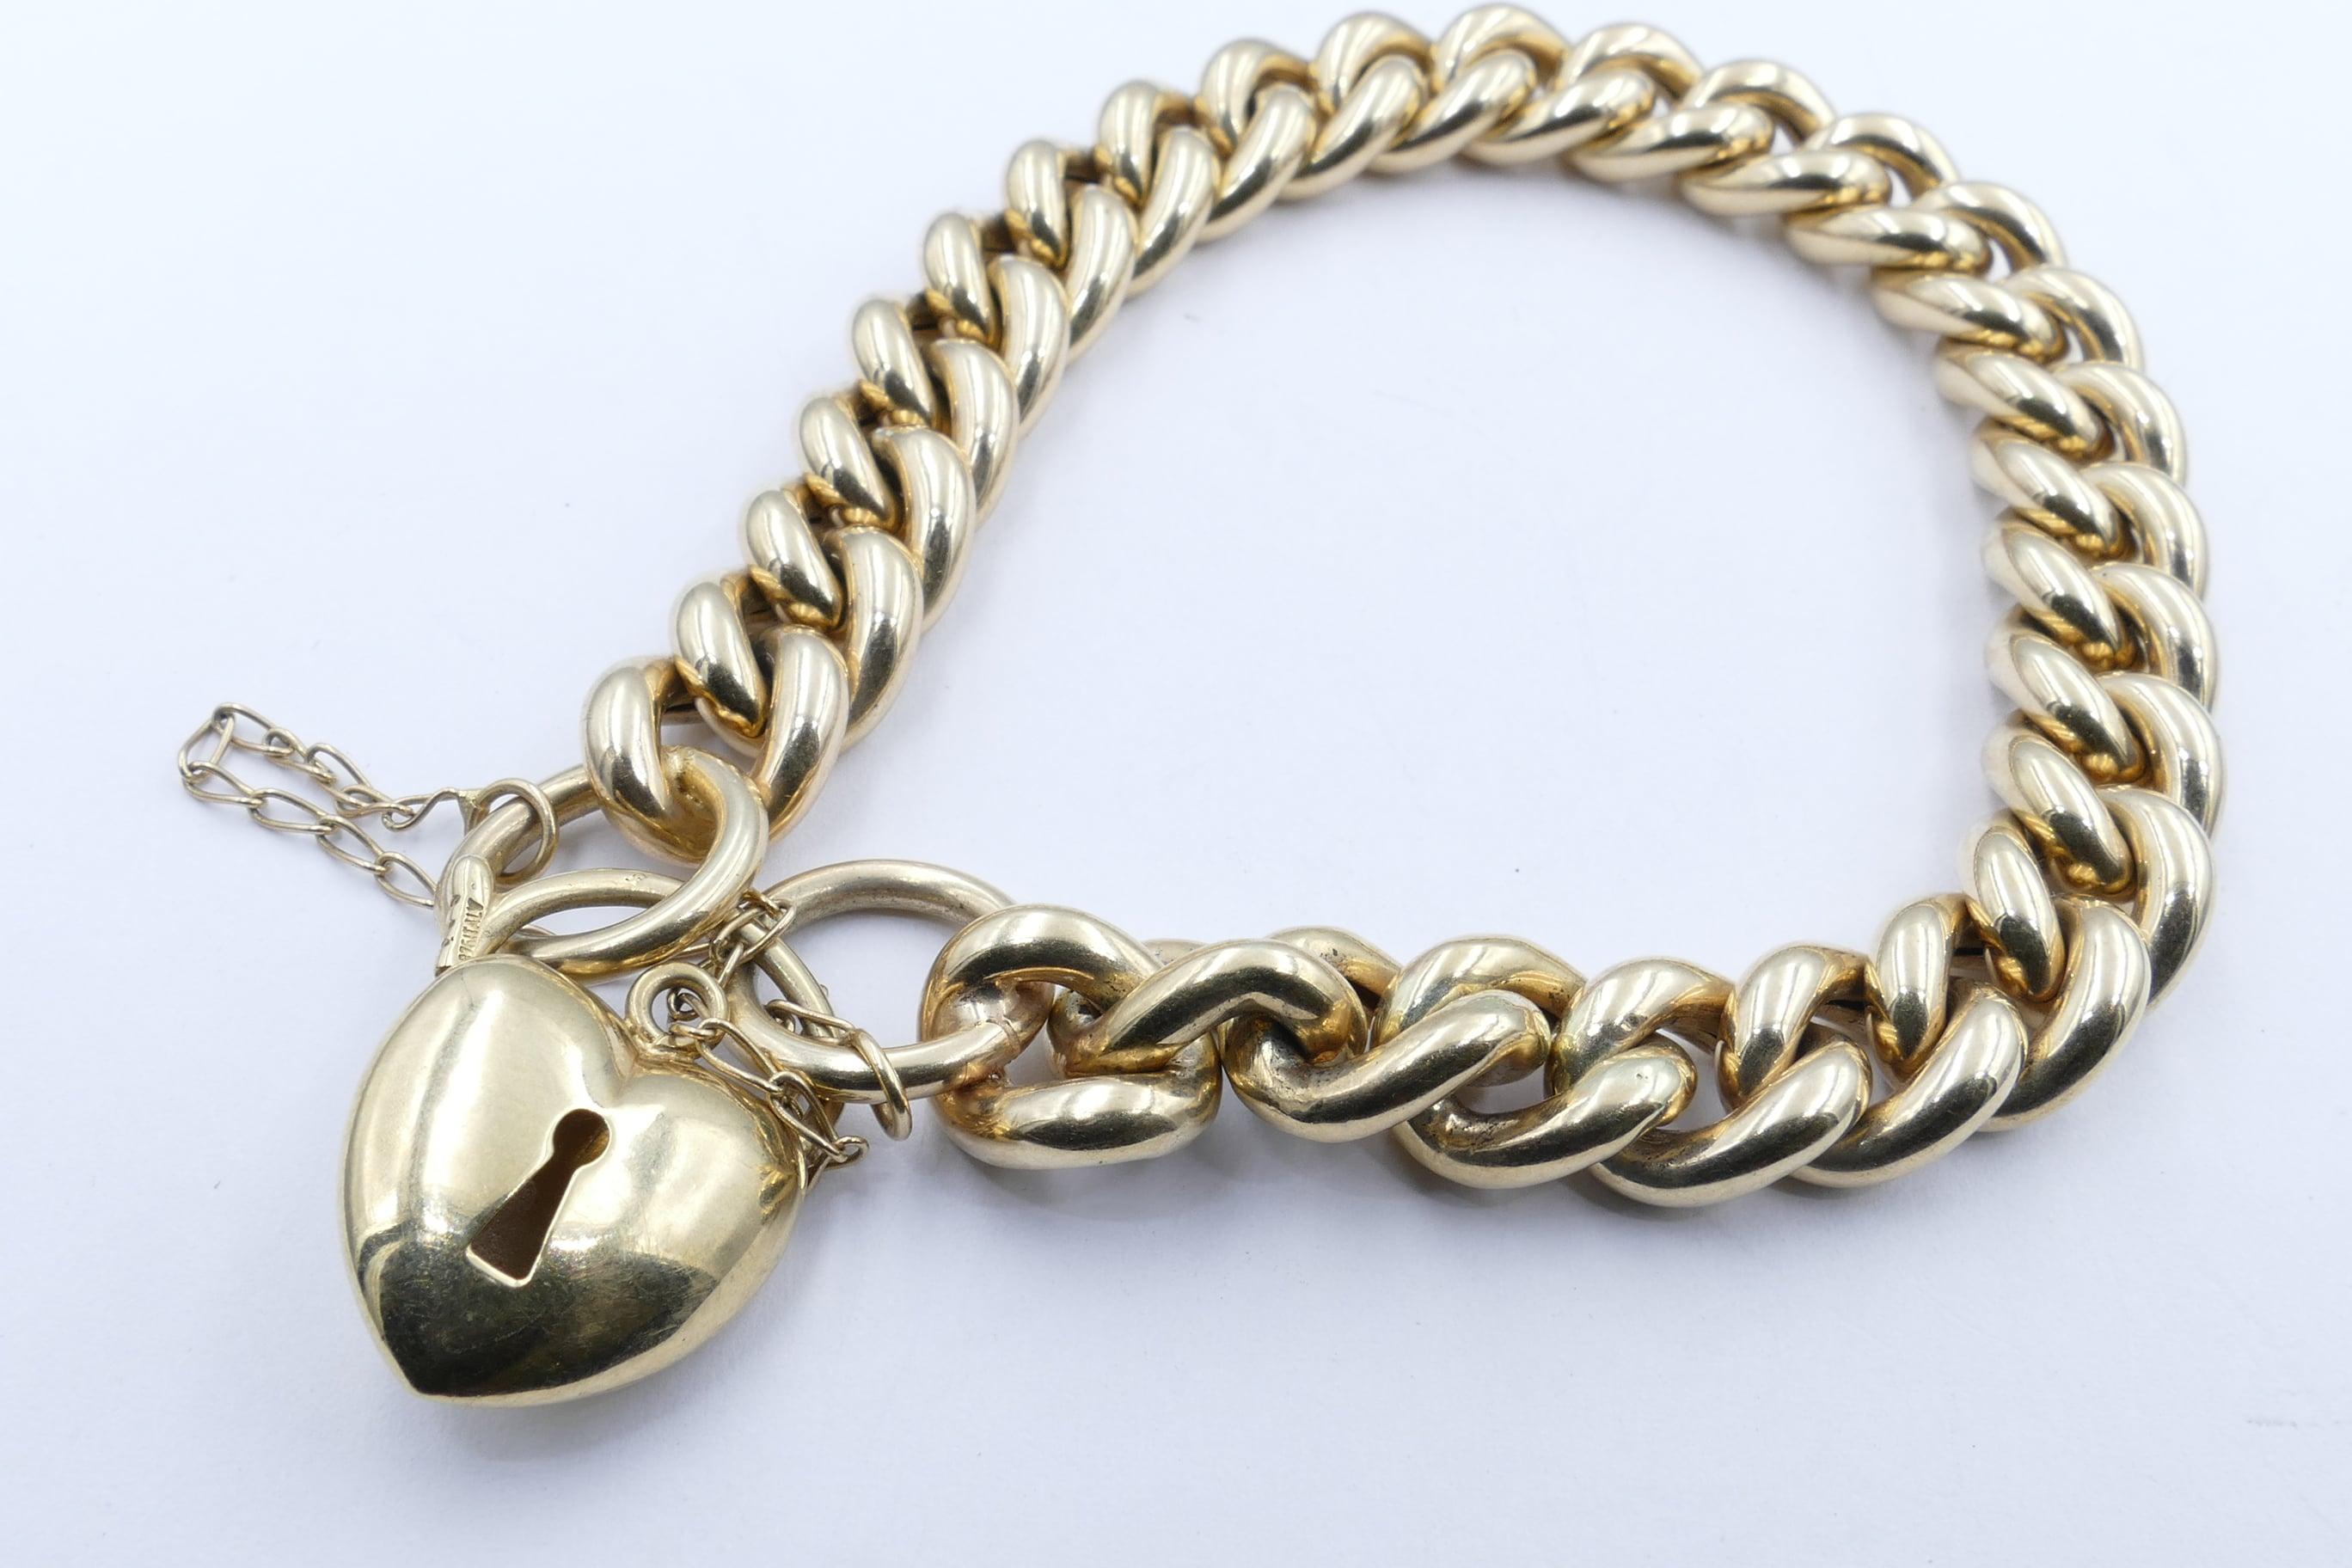 This Curb Link Bracelet is in excellent Condition & probably created in Italy just after the Art Deco period.
It measures 22cm in length & 10.17mm wide with a Heart Locket to form the clasp.
A great 'every day' addition to any wardrobe.
Total Item